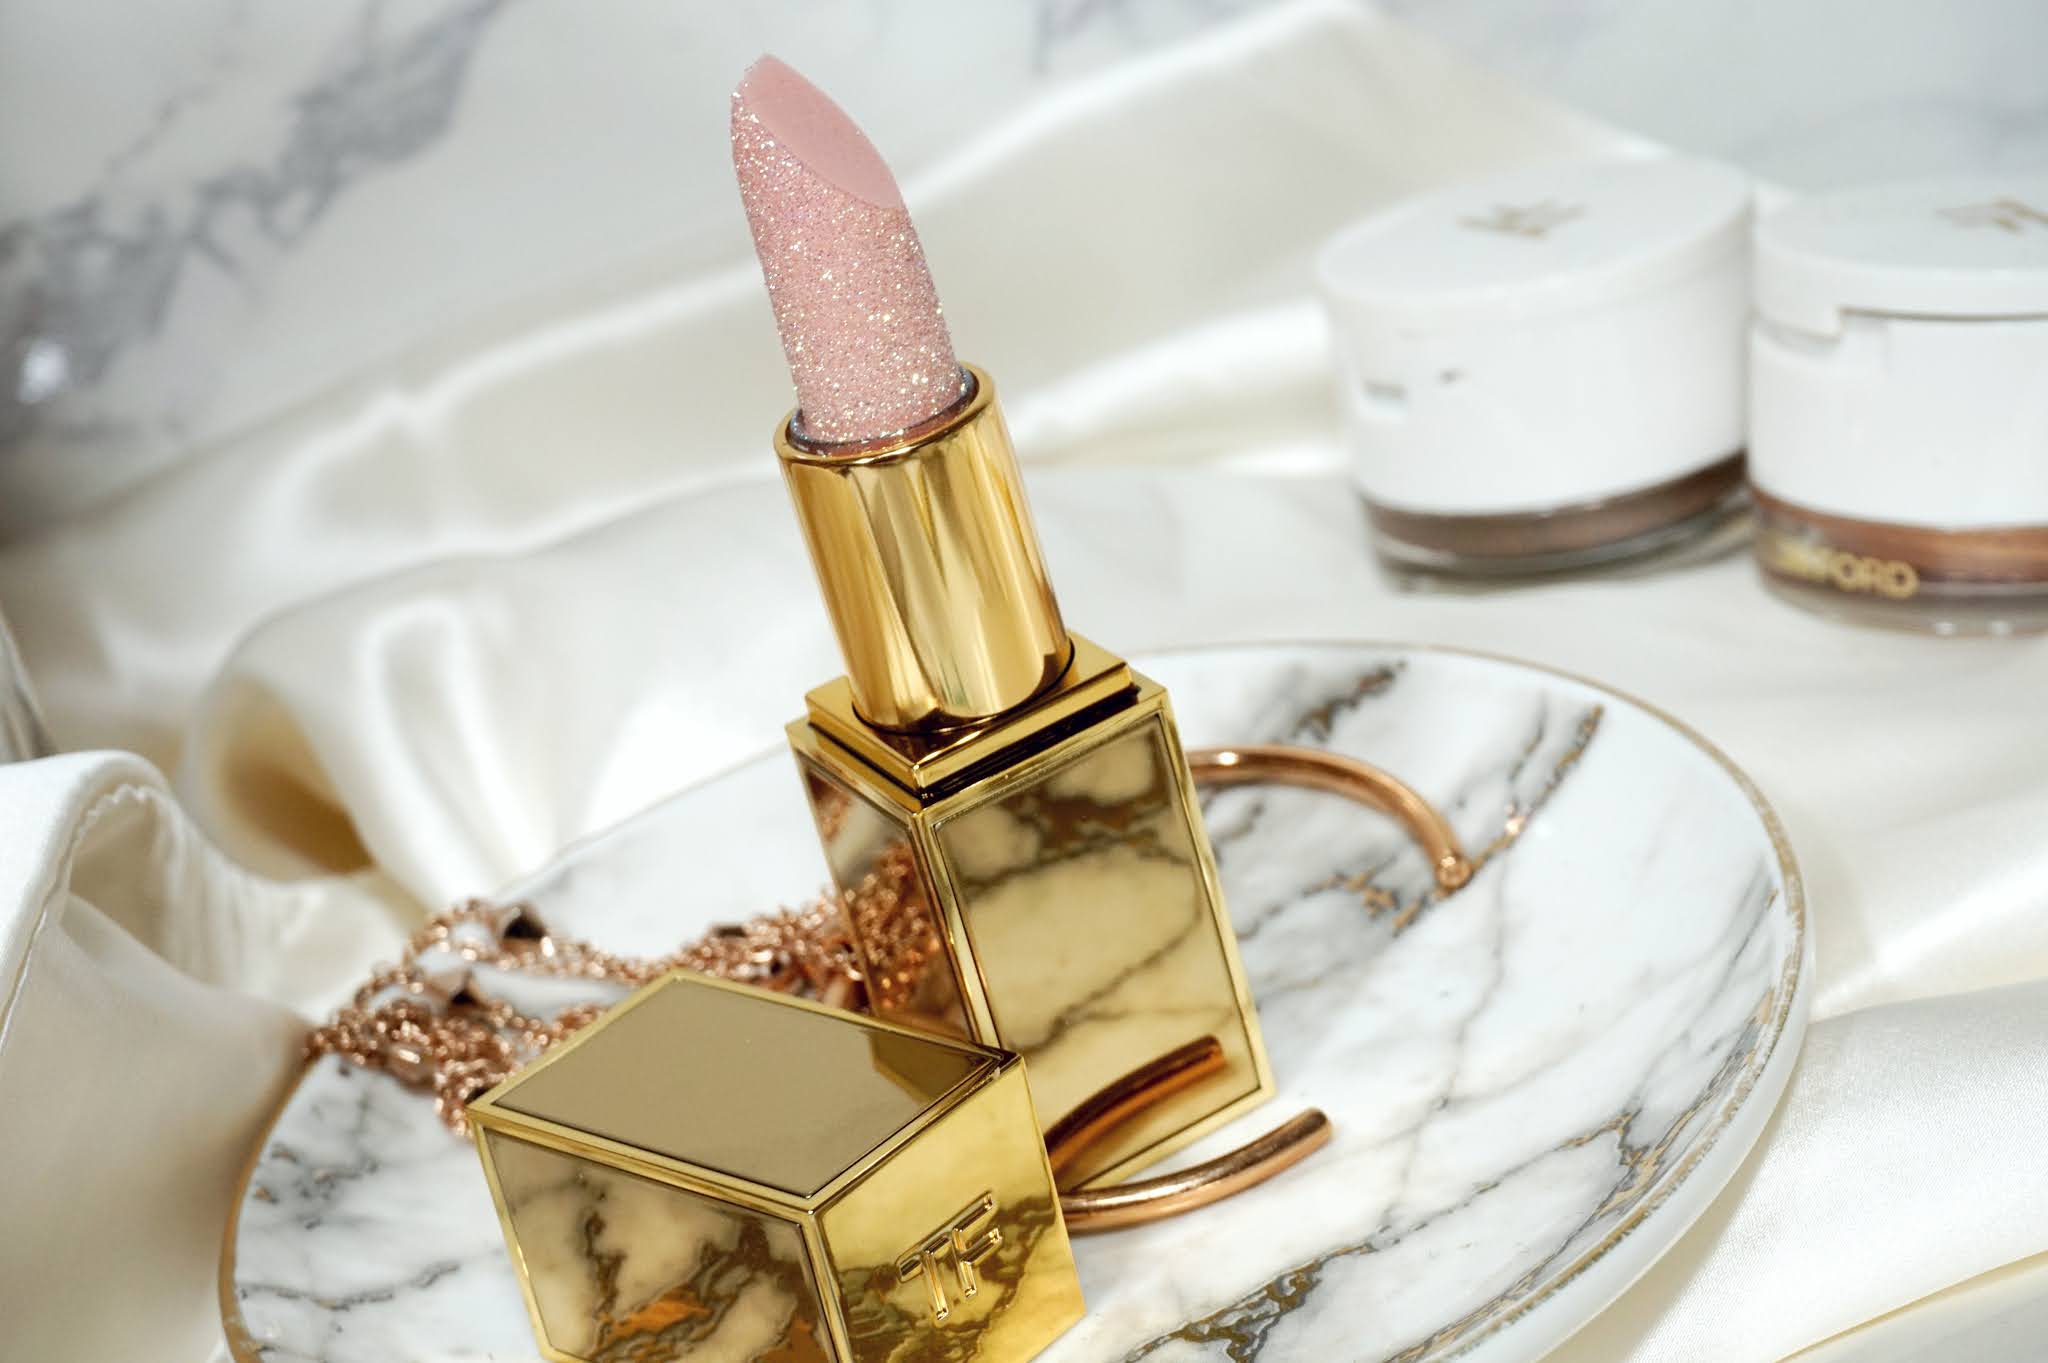 Tom Ford Soleil Neige Lip Balm Frost Review and Swatches